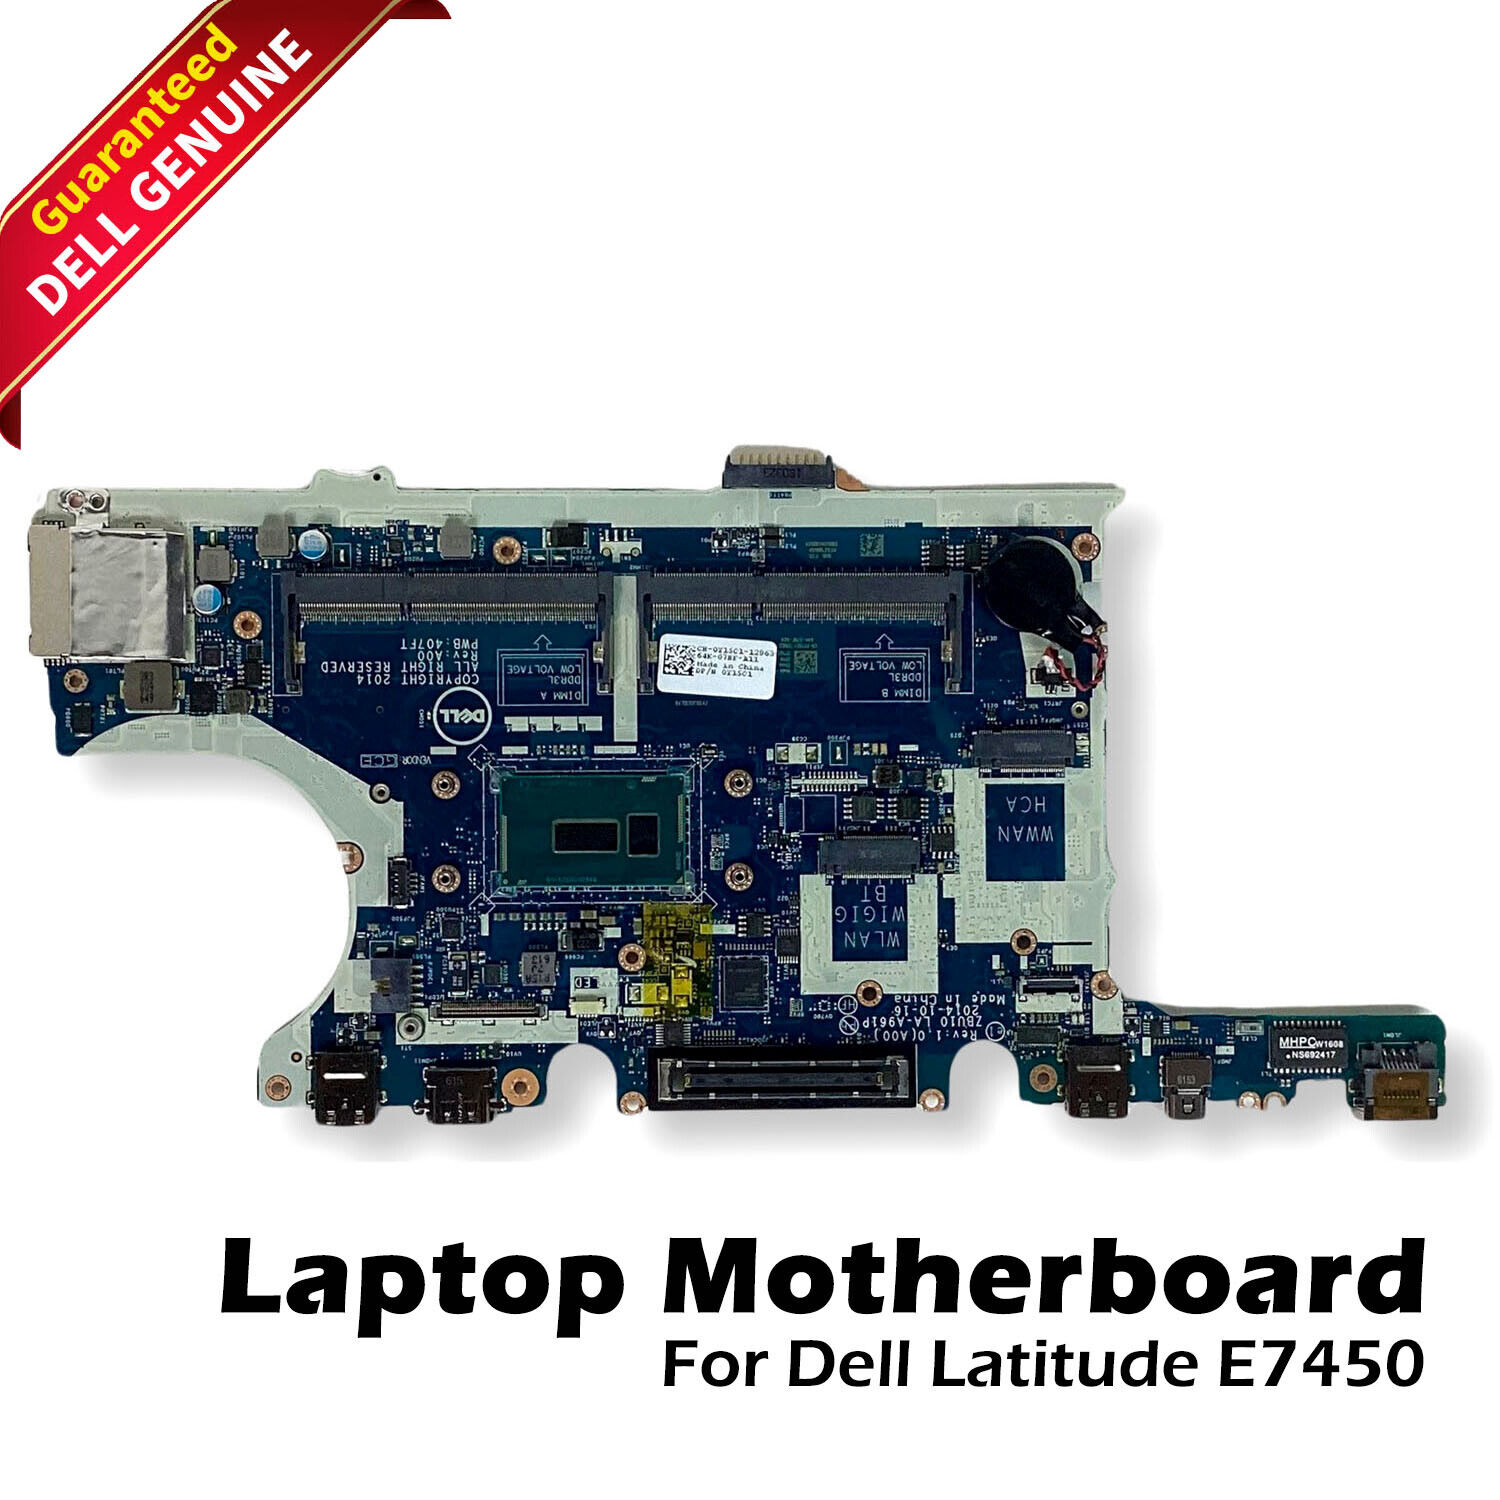 Dell Latitude E7450 Motherboard System Board with i7 2.6GHz Intel Graphics Y15C1